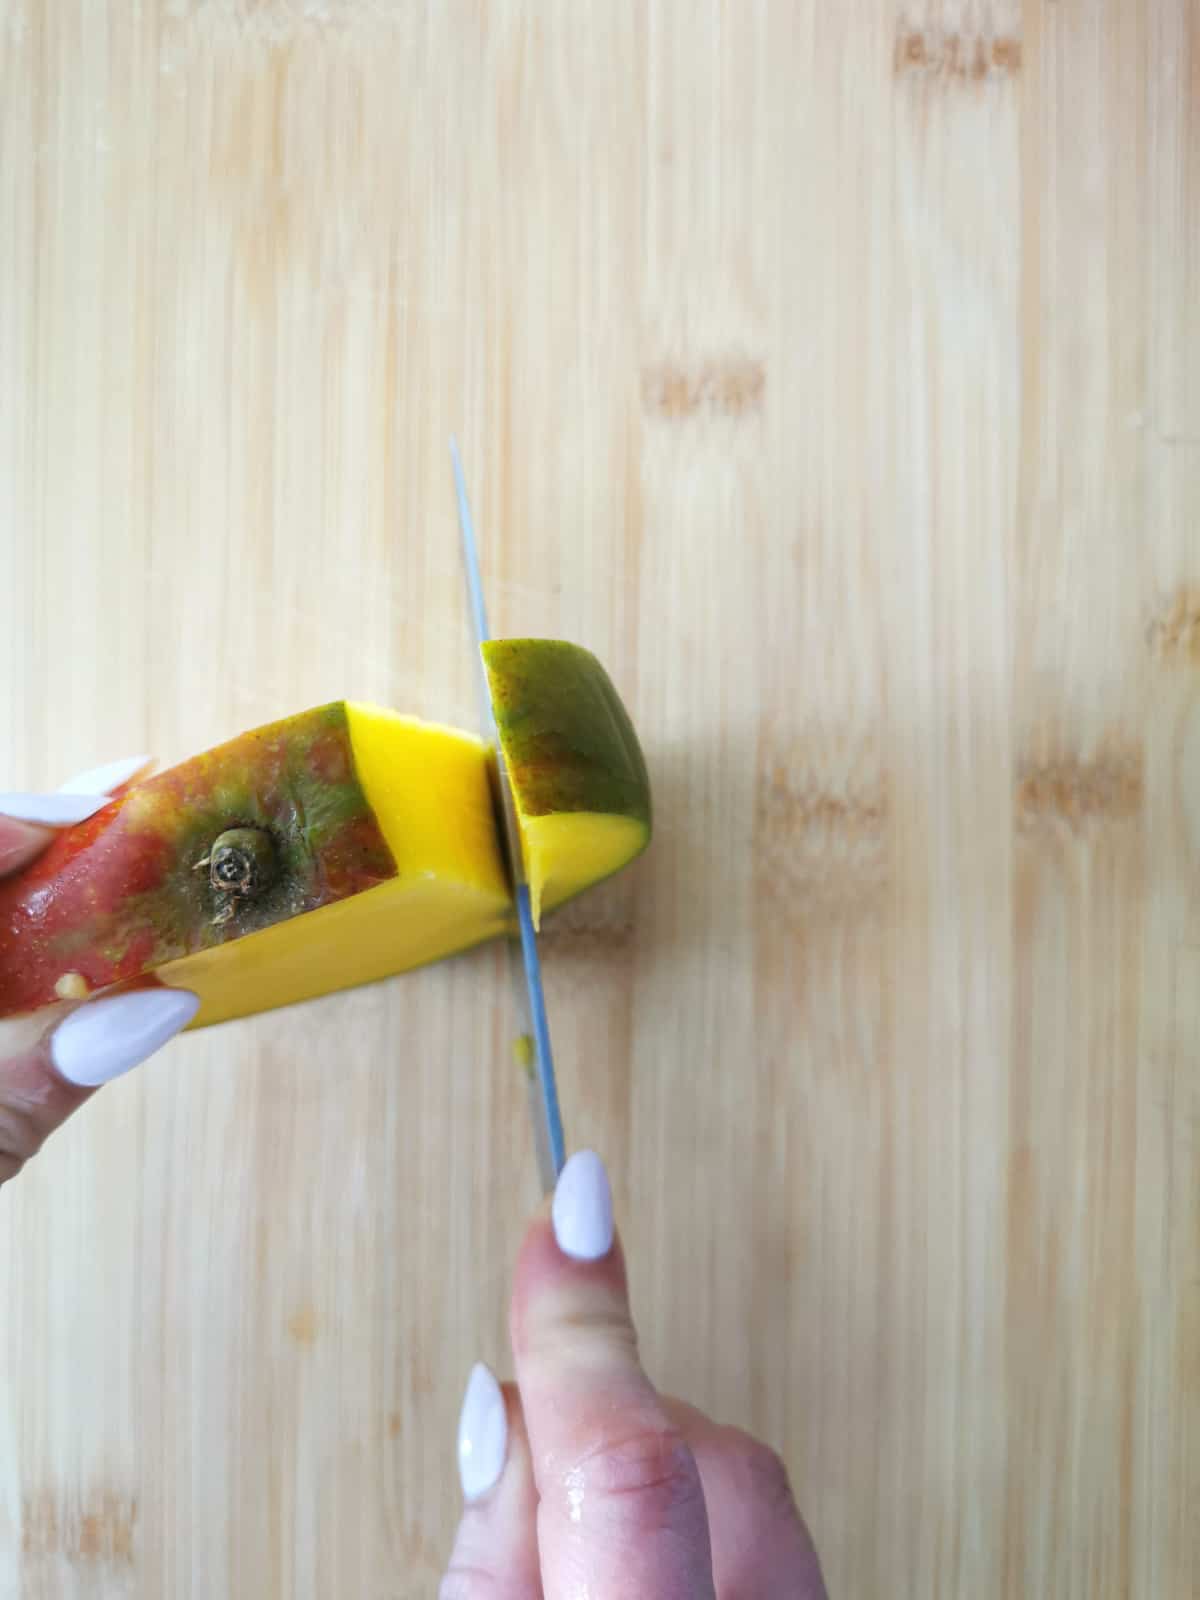 hand holding a knife cutting side of mango to trim flesh from pit.